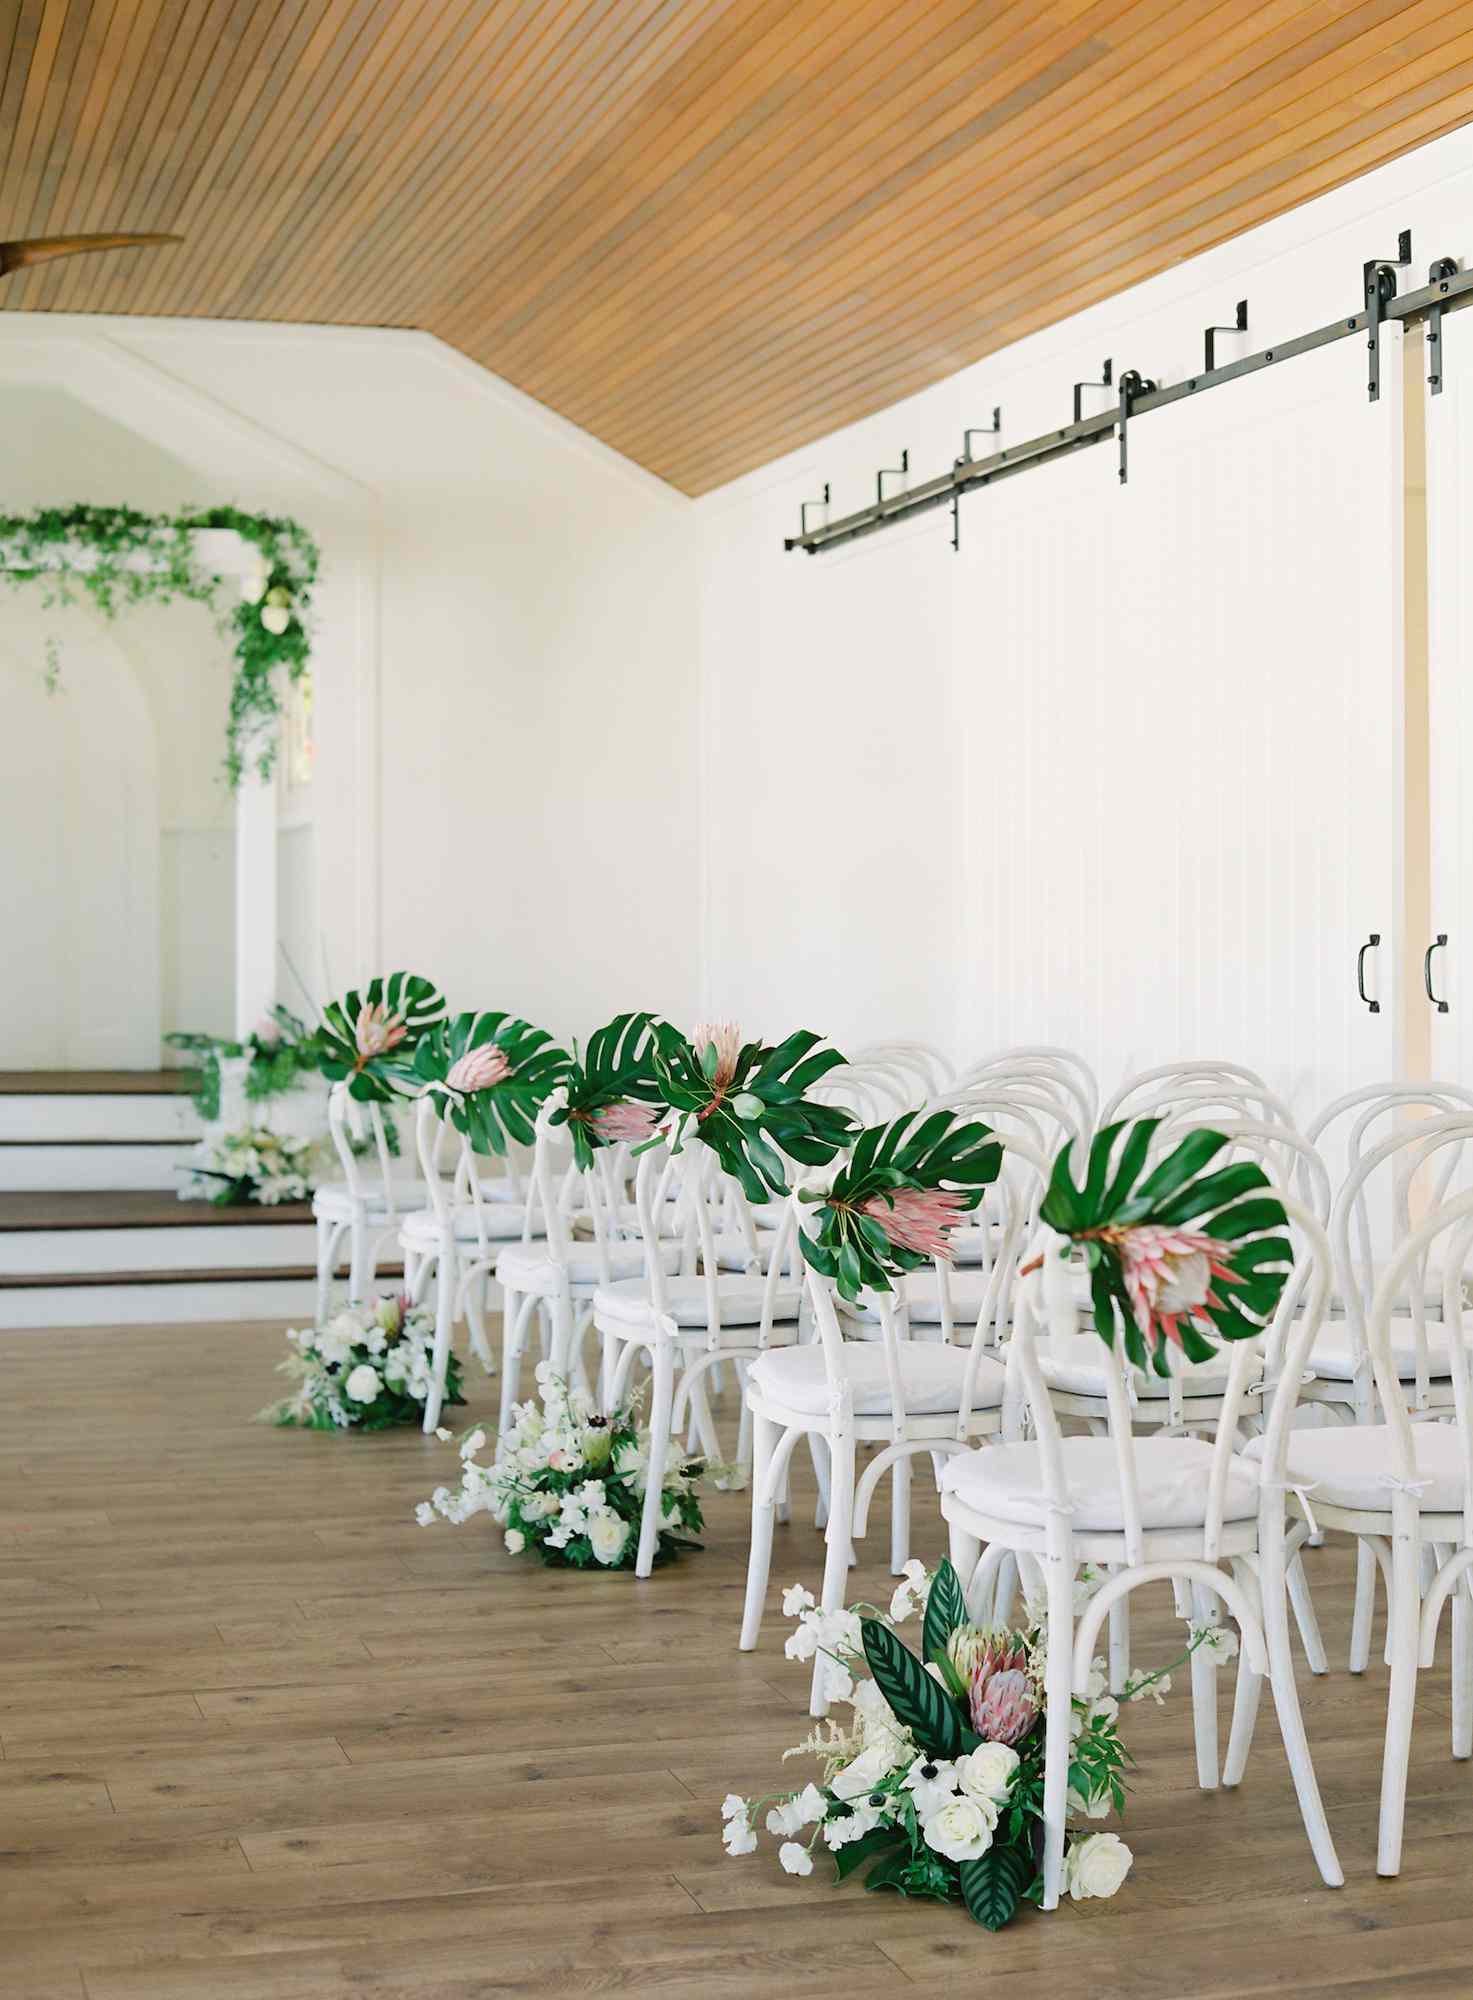 Ceremony aisle with monstera leaf and protea arrangements on chairs